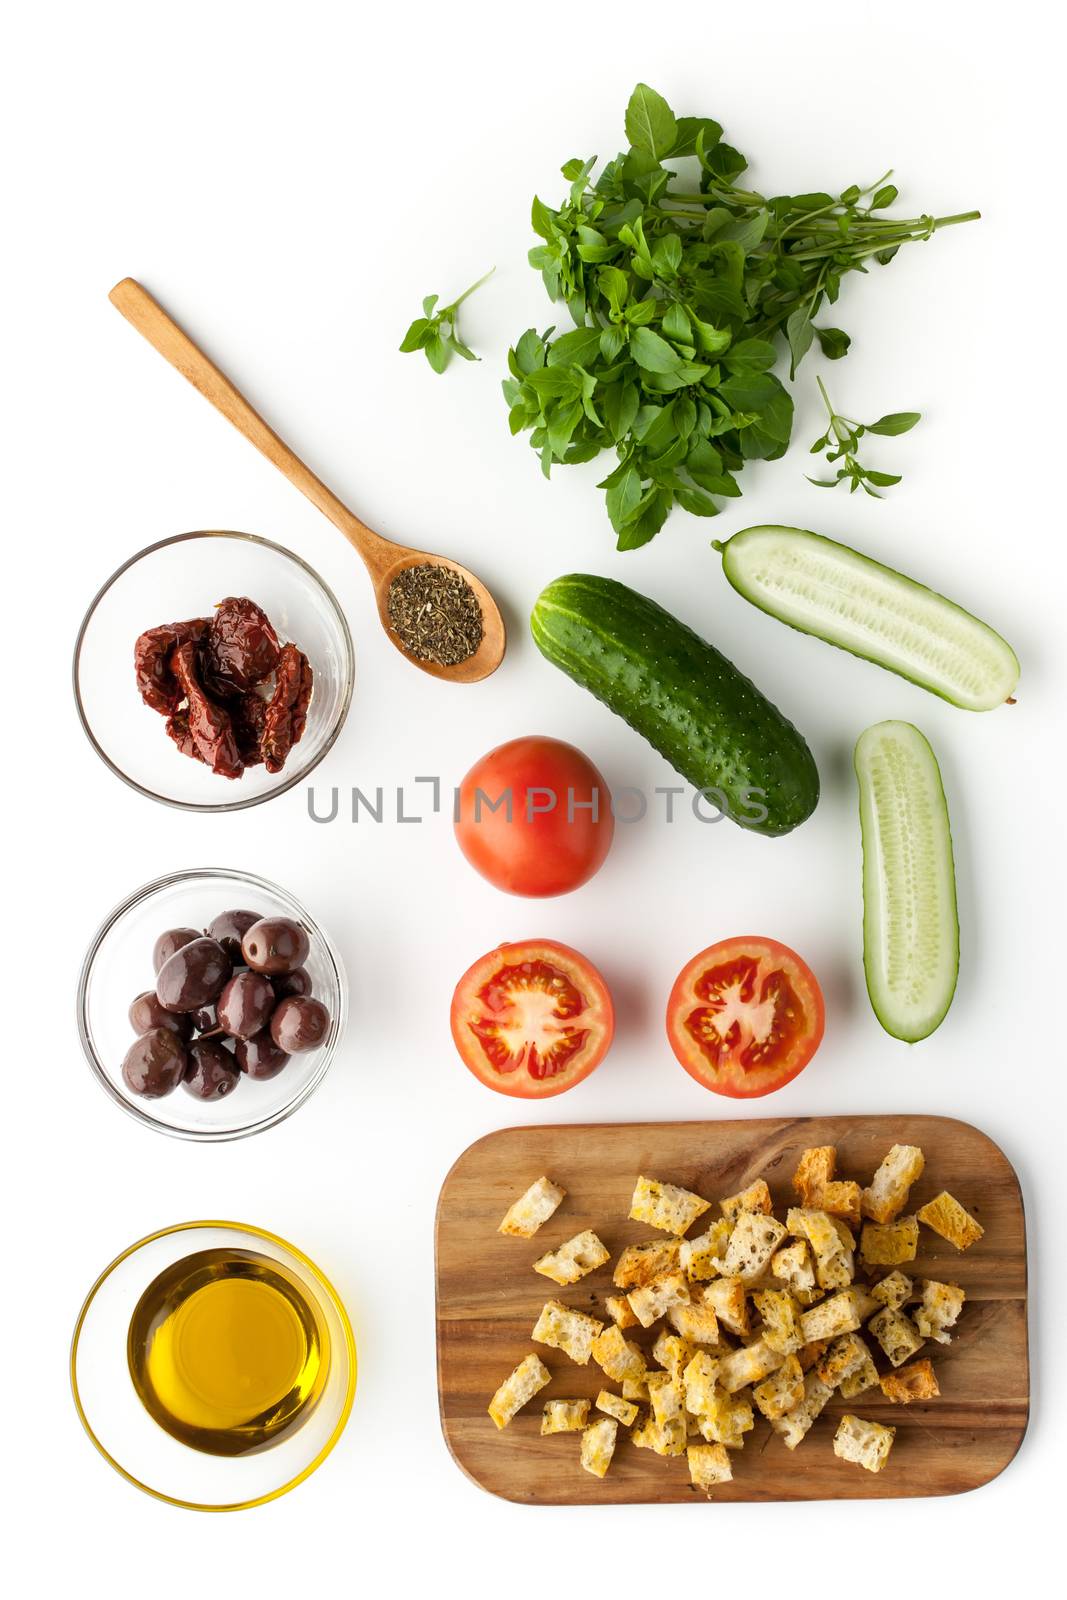 Ingredients for panzanella salad top view